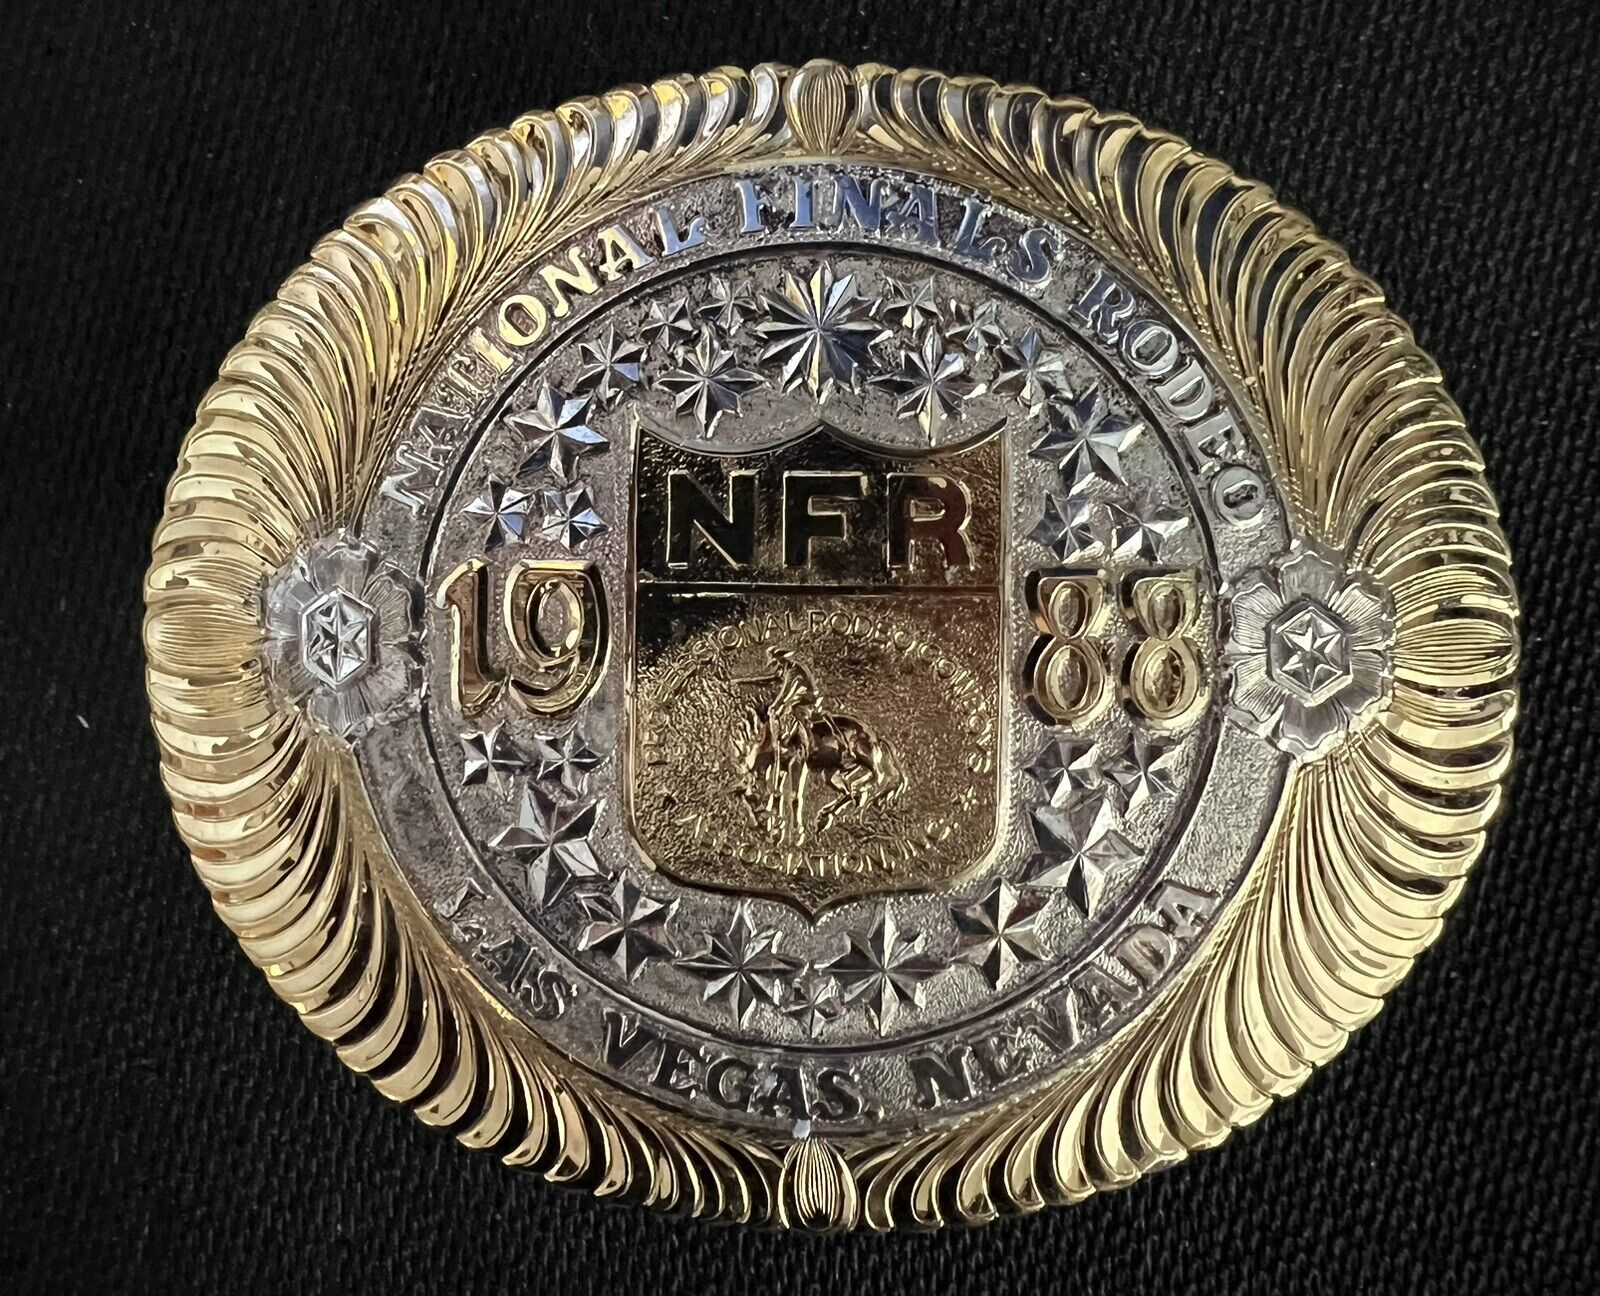 1988 National Finals Rodeo Belt Buckle Gary Gist Gold on Sterling Silver Overlay